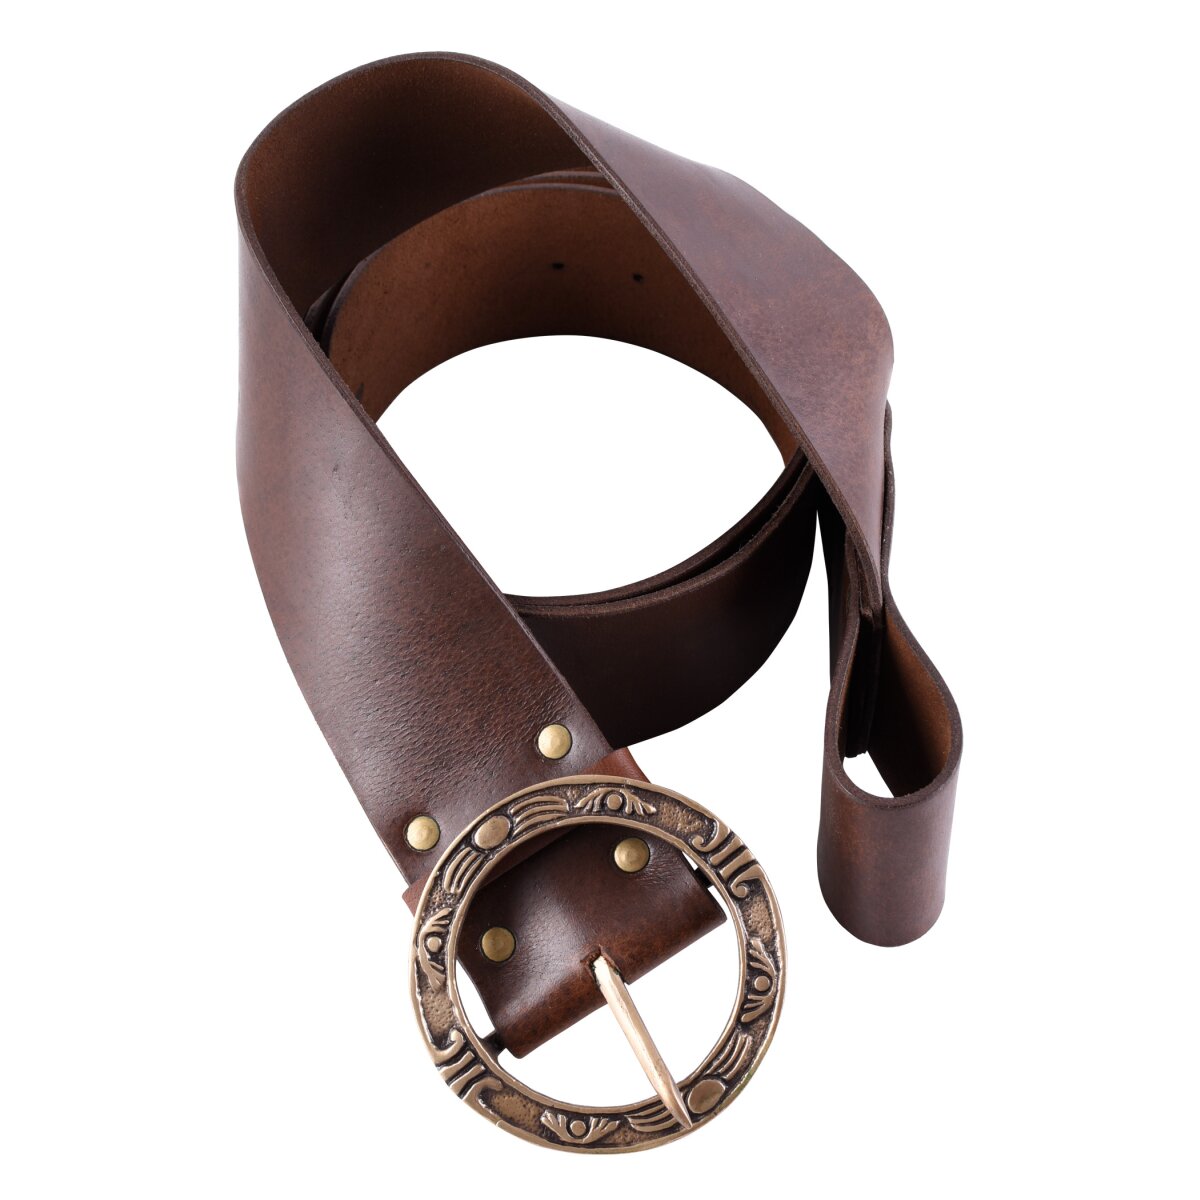 Pirate leather cross belt with round buckle